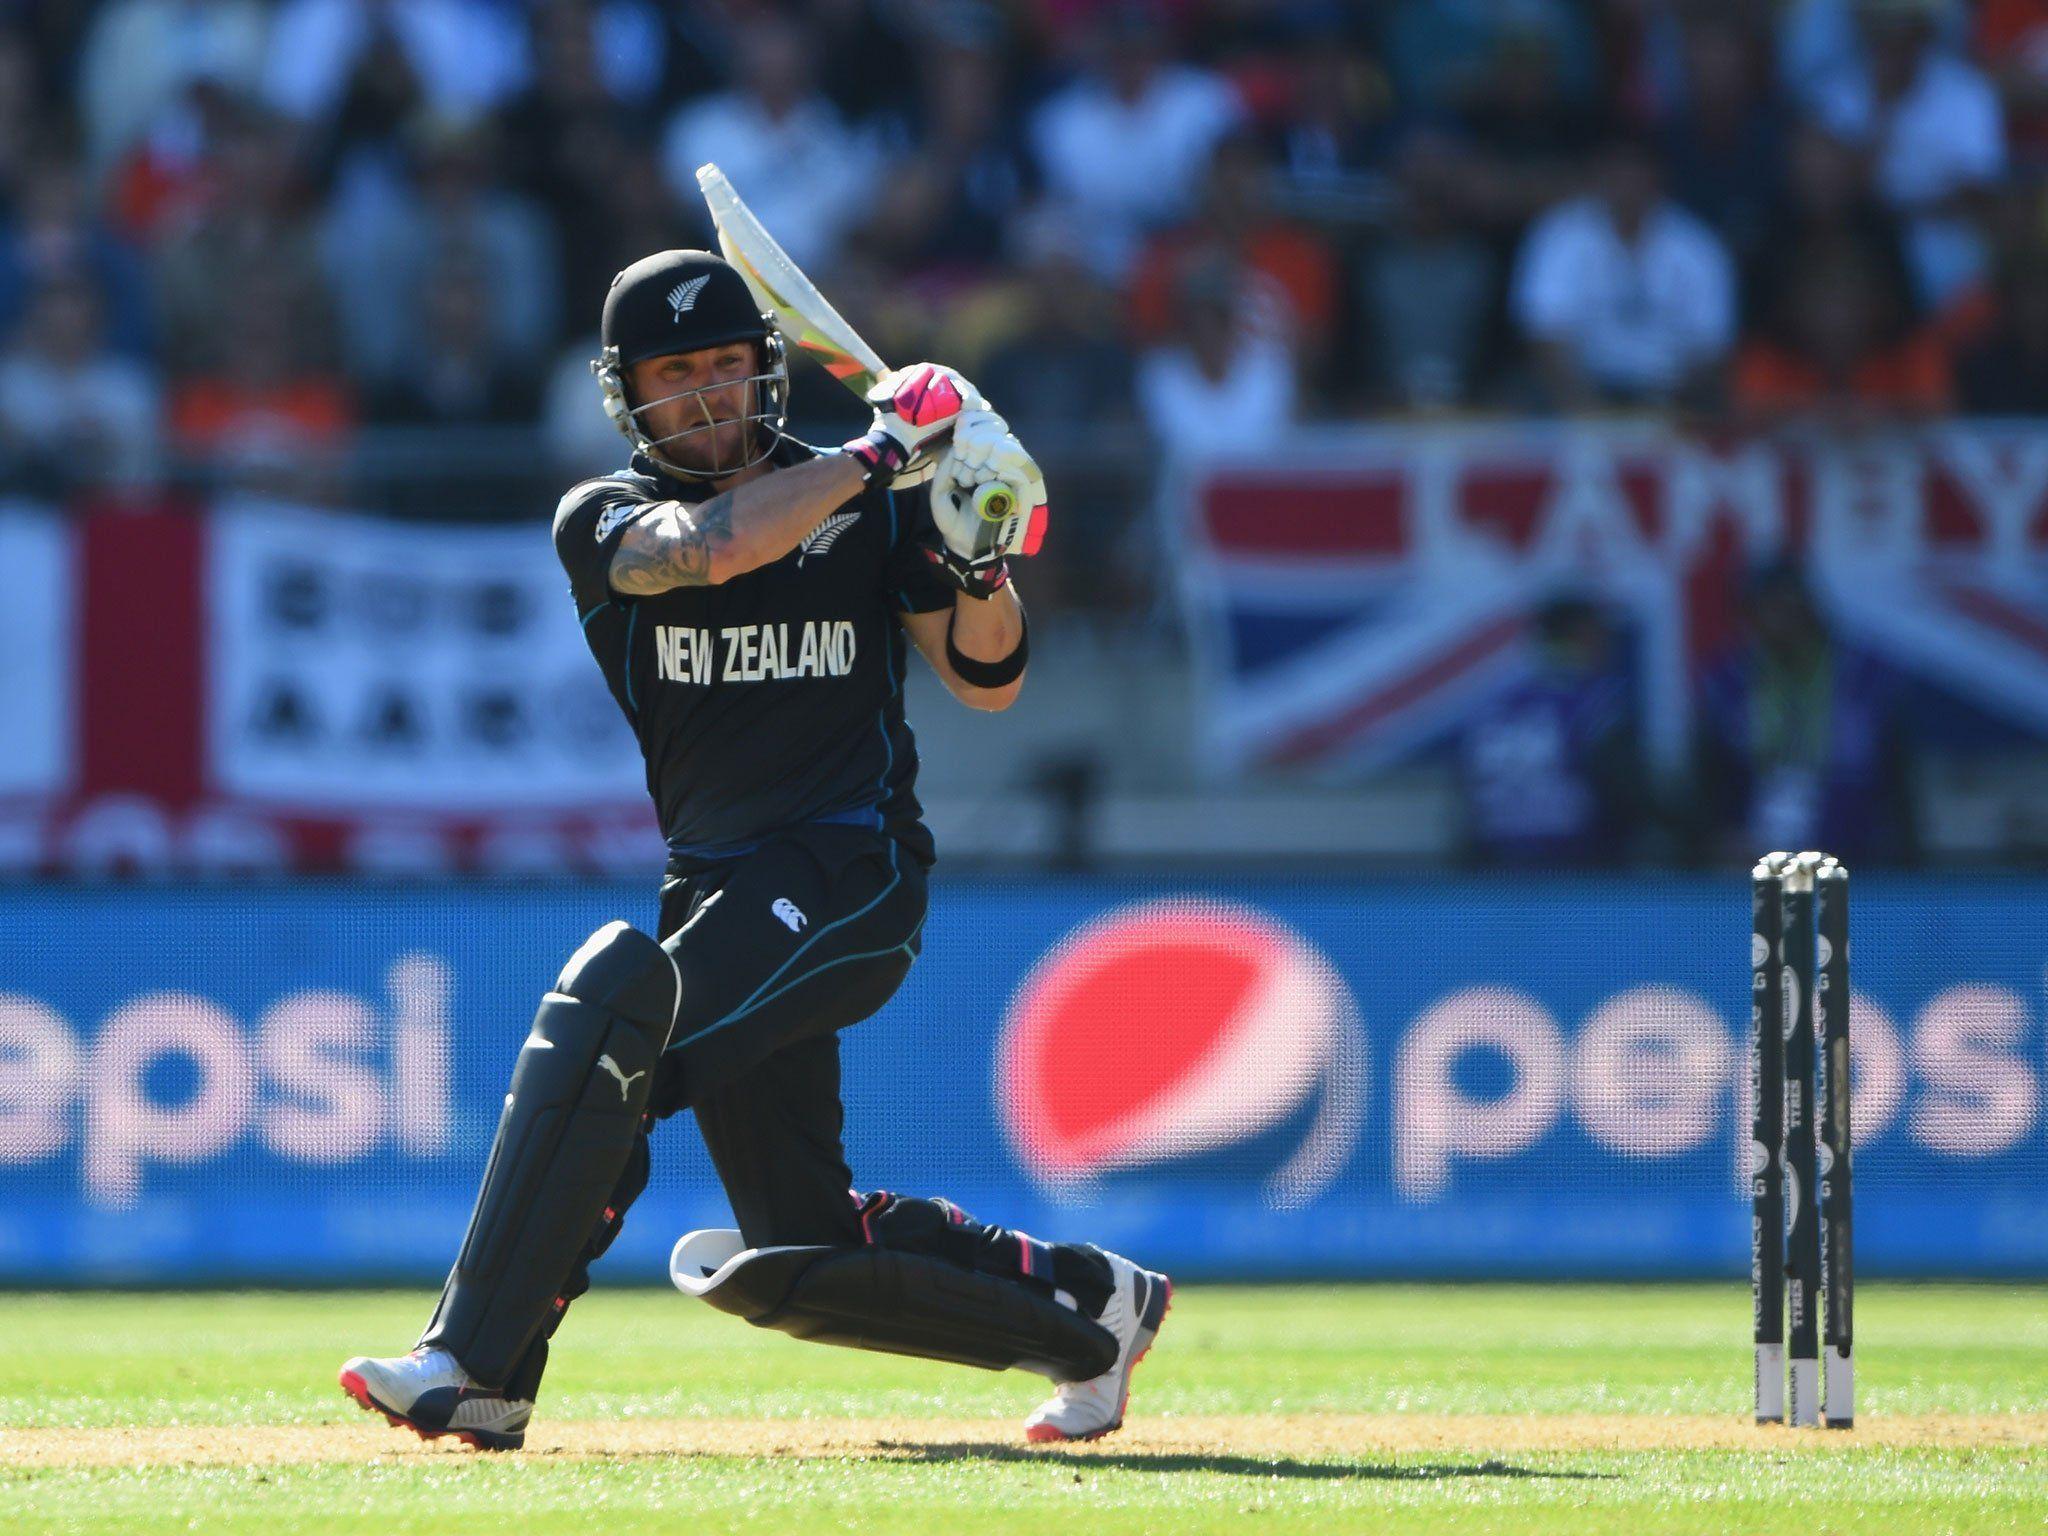 England vs New Zealand match report: England humiliated as Brendon